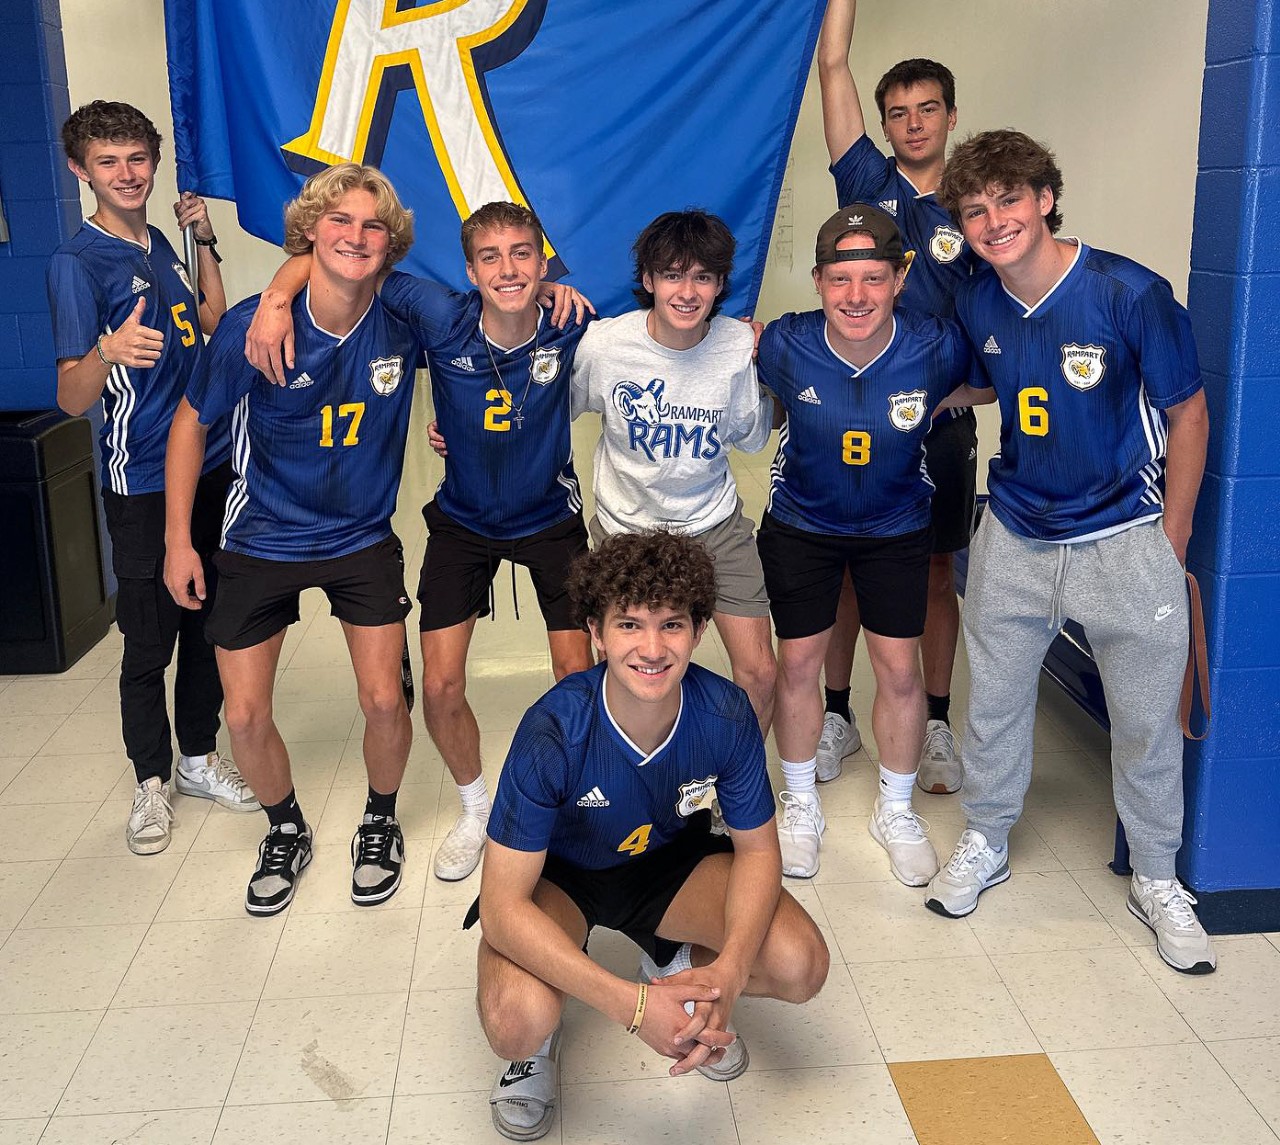 Rampart soccer team with a Rampart flag